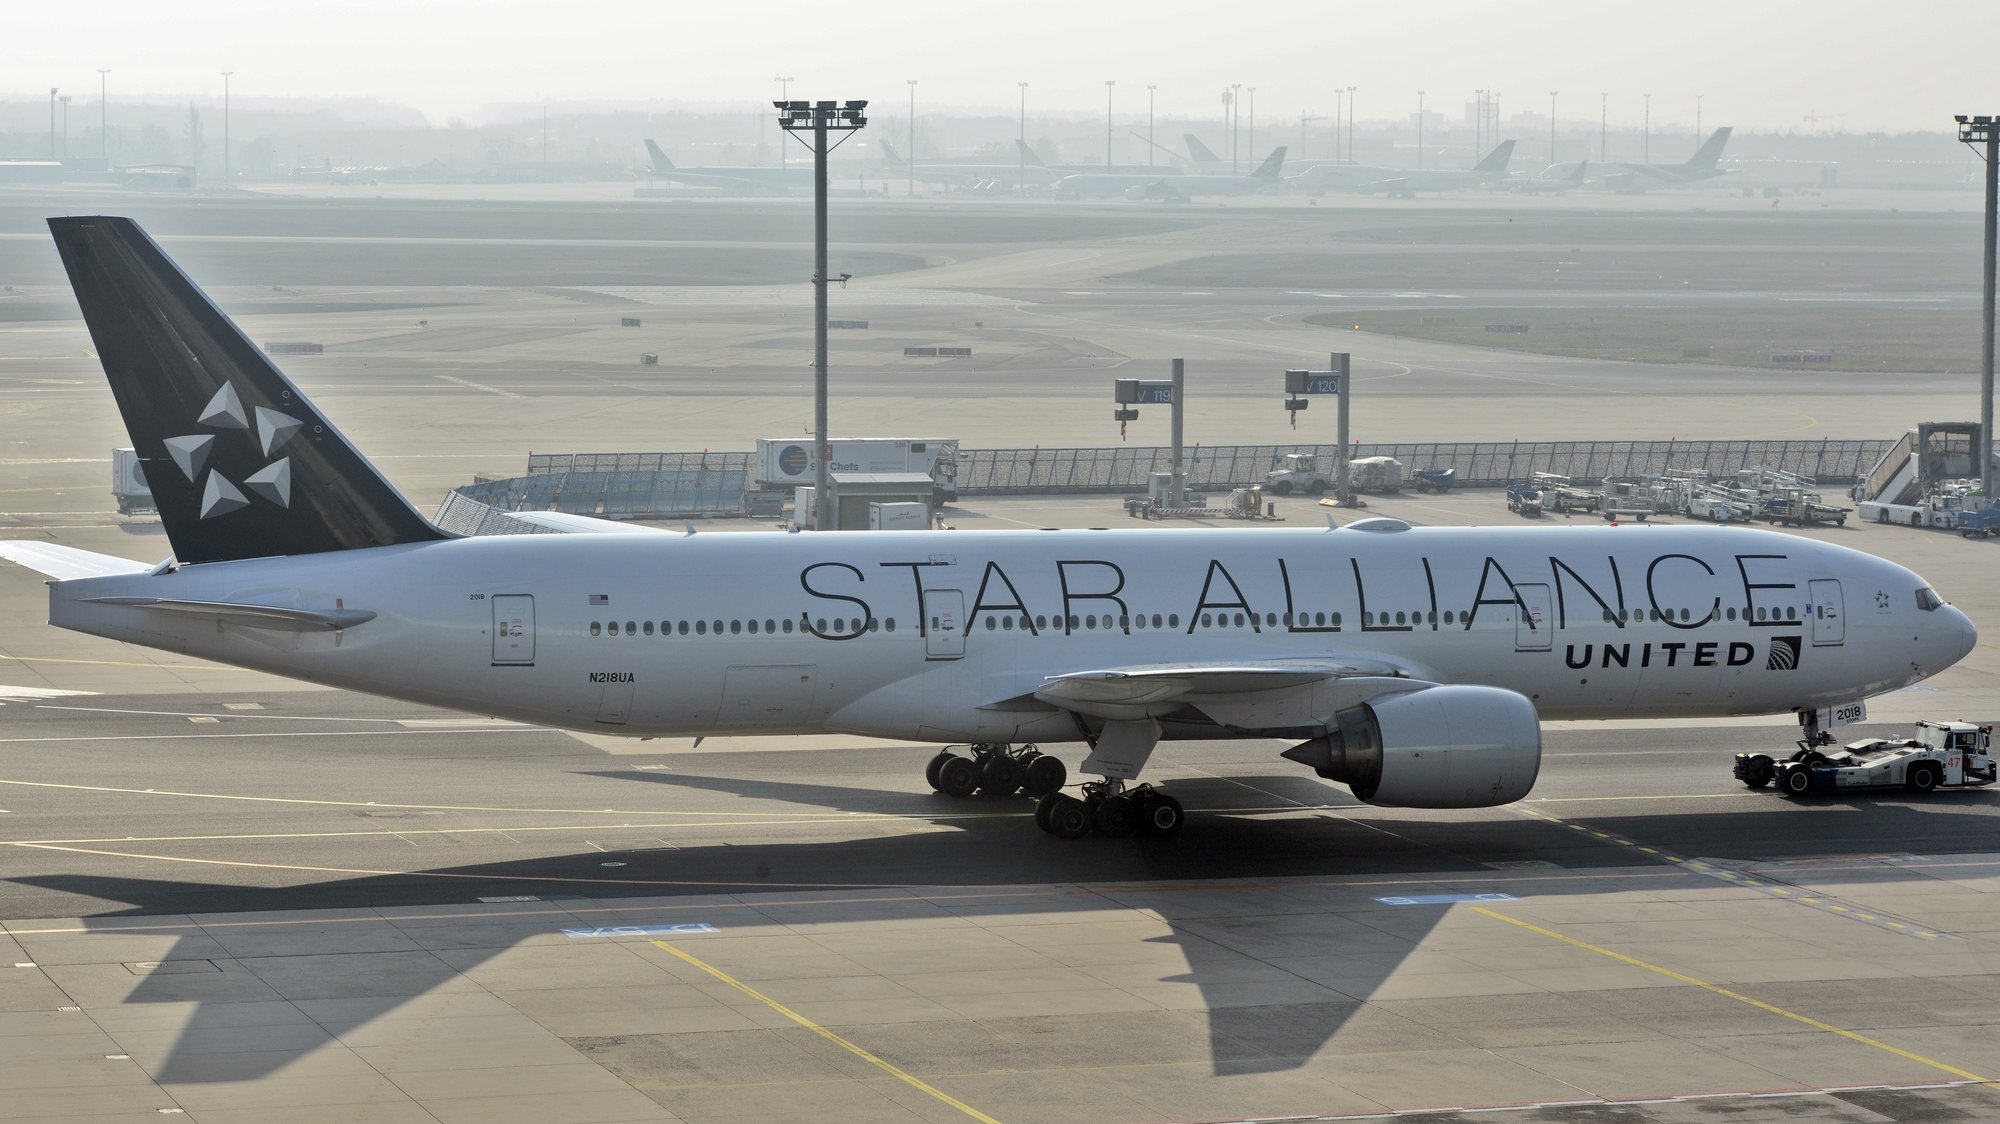 epa08746893 (FILE) - An image showing a Boeing 777-222 passenger plane of United Airlines in Star Alliance livery at Frankfurt airport, Frankfurt, Germany, 08 February 2018 (reissued 15 October 2020). United Airlines is to publish their 3rd quarter 2020 results on 15 October 2020.  EPA/MAURITZ ANTIN *** Local Caption *** 54163130